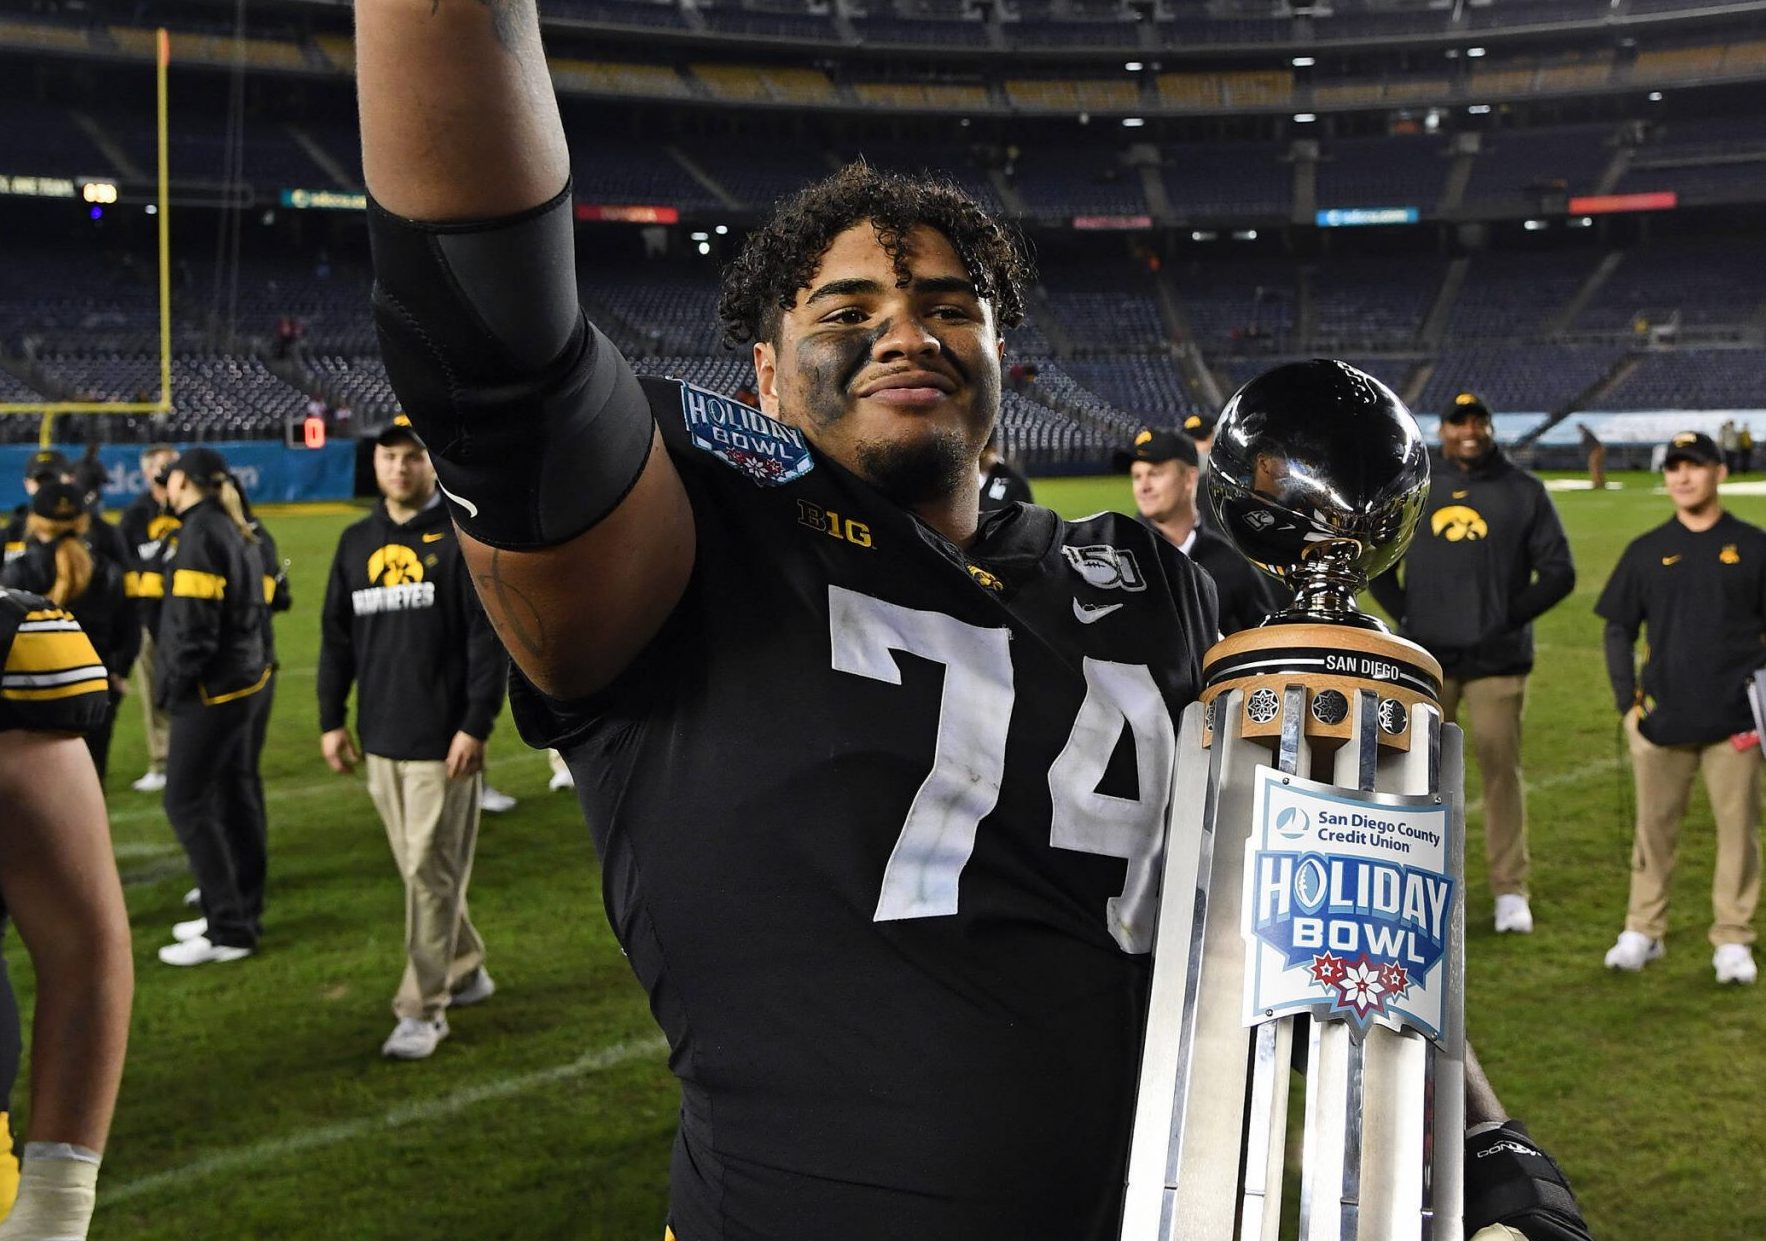 SAN DIEGO, CA - DECEMBER 27: Iowa Hawkeyes offensive lineman Tristan Wirfs 74 with the Holiday Bowl trophy after the Hawkeyes defeated the USC Trojans 49 to 24 in the Holiday Bowl played on December 27, 2019 at SDCCU Stadium in San Diego, CA. Photo by John Cordes/Icon Sportswire COLLEGE FOOTBALL: DEC 27 Holiday Bowl - USC v Iowa PUBLICATIONxINxGERxSUIxAUTxHUNxRUSxSWExNORxDENxONLY Icon506191227026